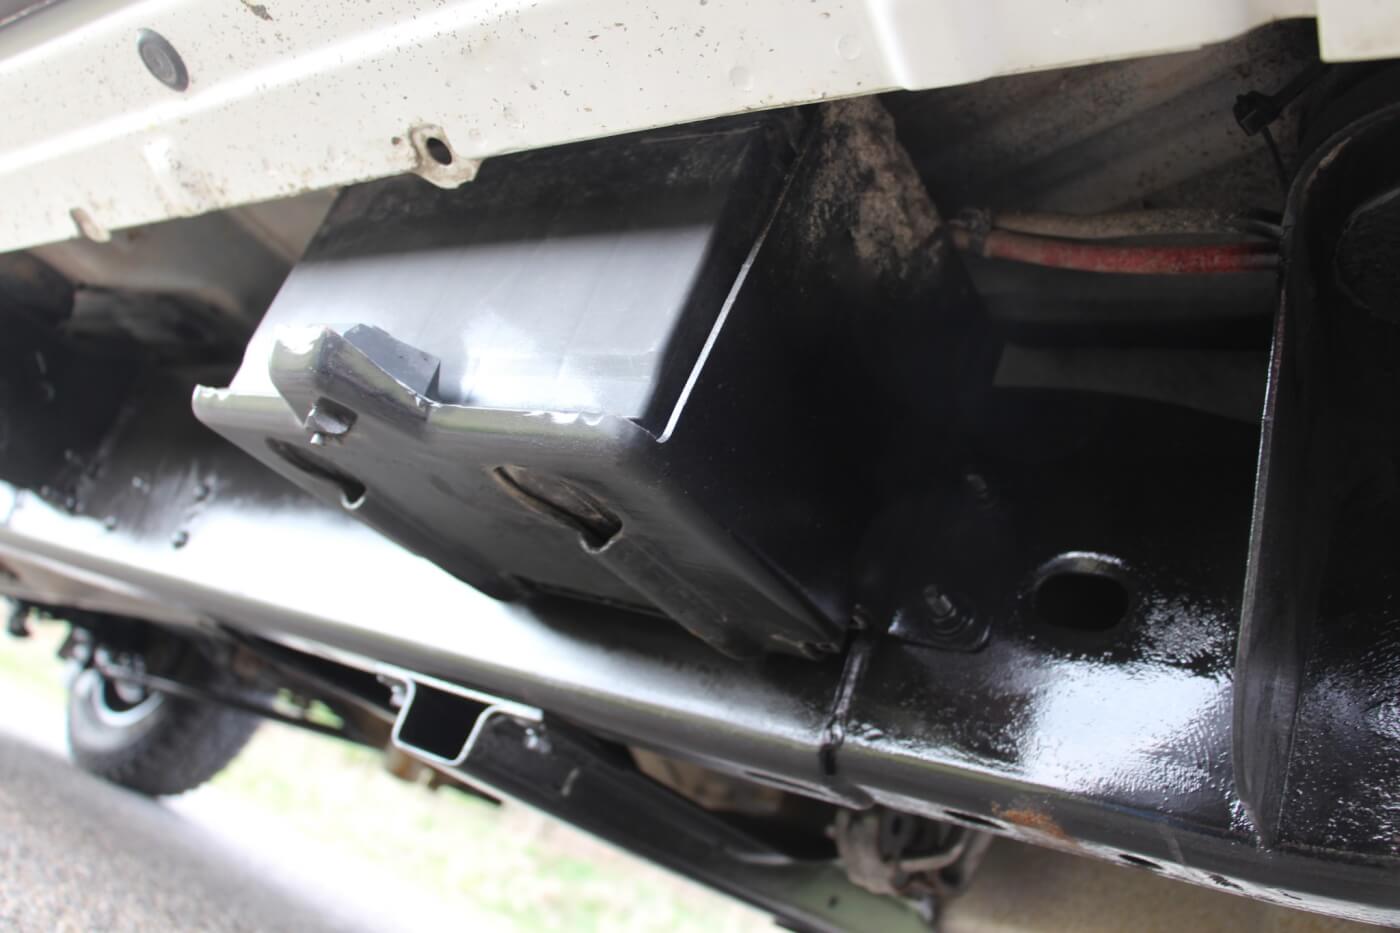 With the billet S475 taking the place of the passenger side battery, it had to be relocated. Conveniently, the Wehrli Custom Fabrication compound turbo kit came with a battery tray that effectively mounted it to the passenger side frame rail.